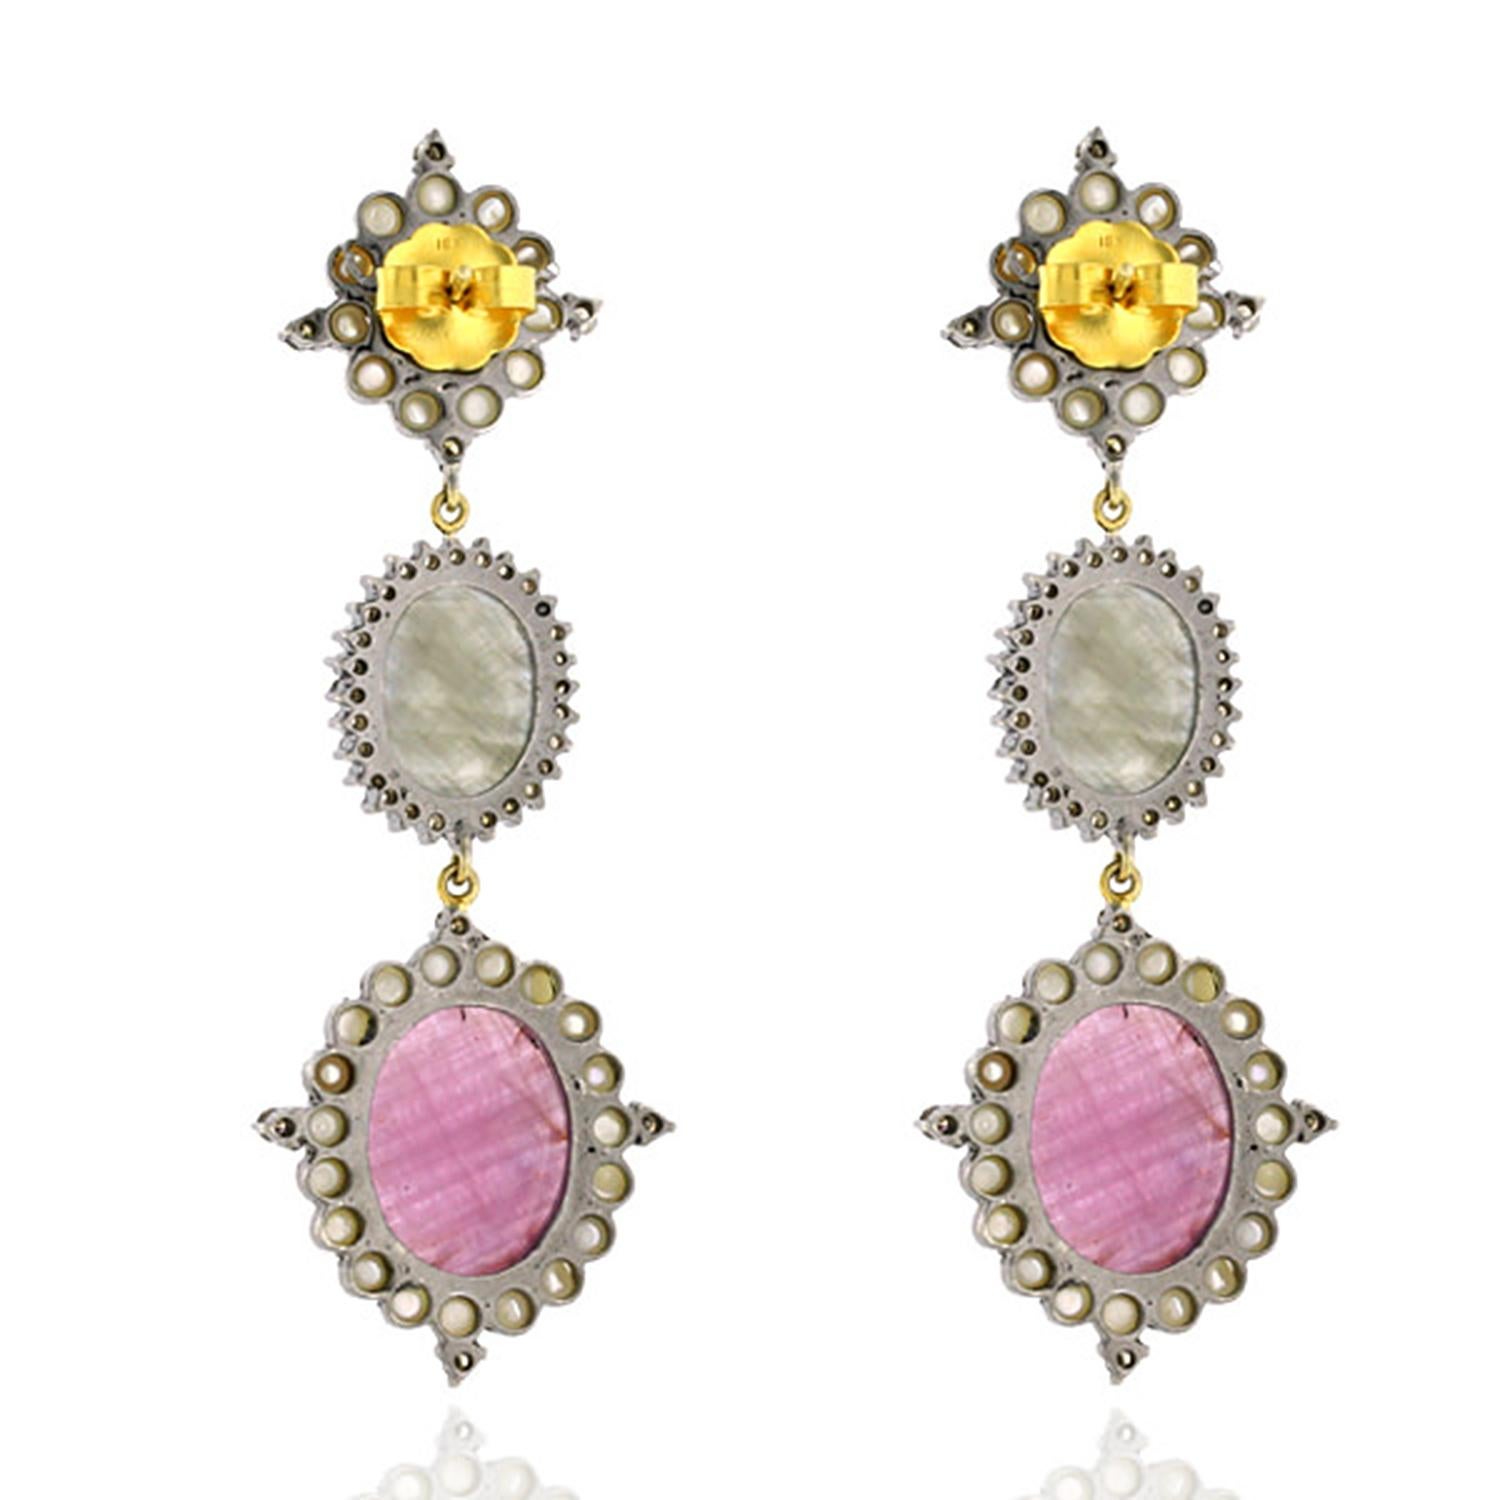 Three-tier Slice Multicolor Sapphire dangle earrings with pearls and diamond around set in 18k Gold and silver is a cool one for the season.

Closure: Push Post

18Kt Gold:2.59gms
Diamond:1.93cts
Sapphire Multi:26.5cts
Pearl:6.64cts
